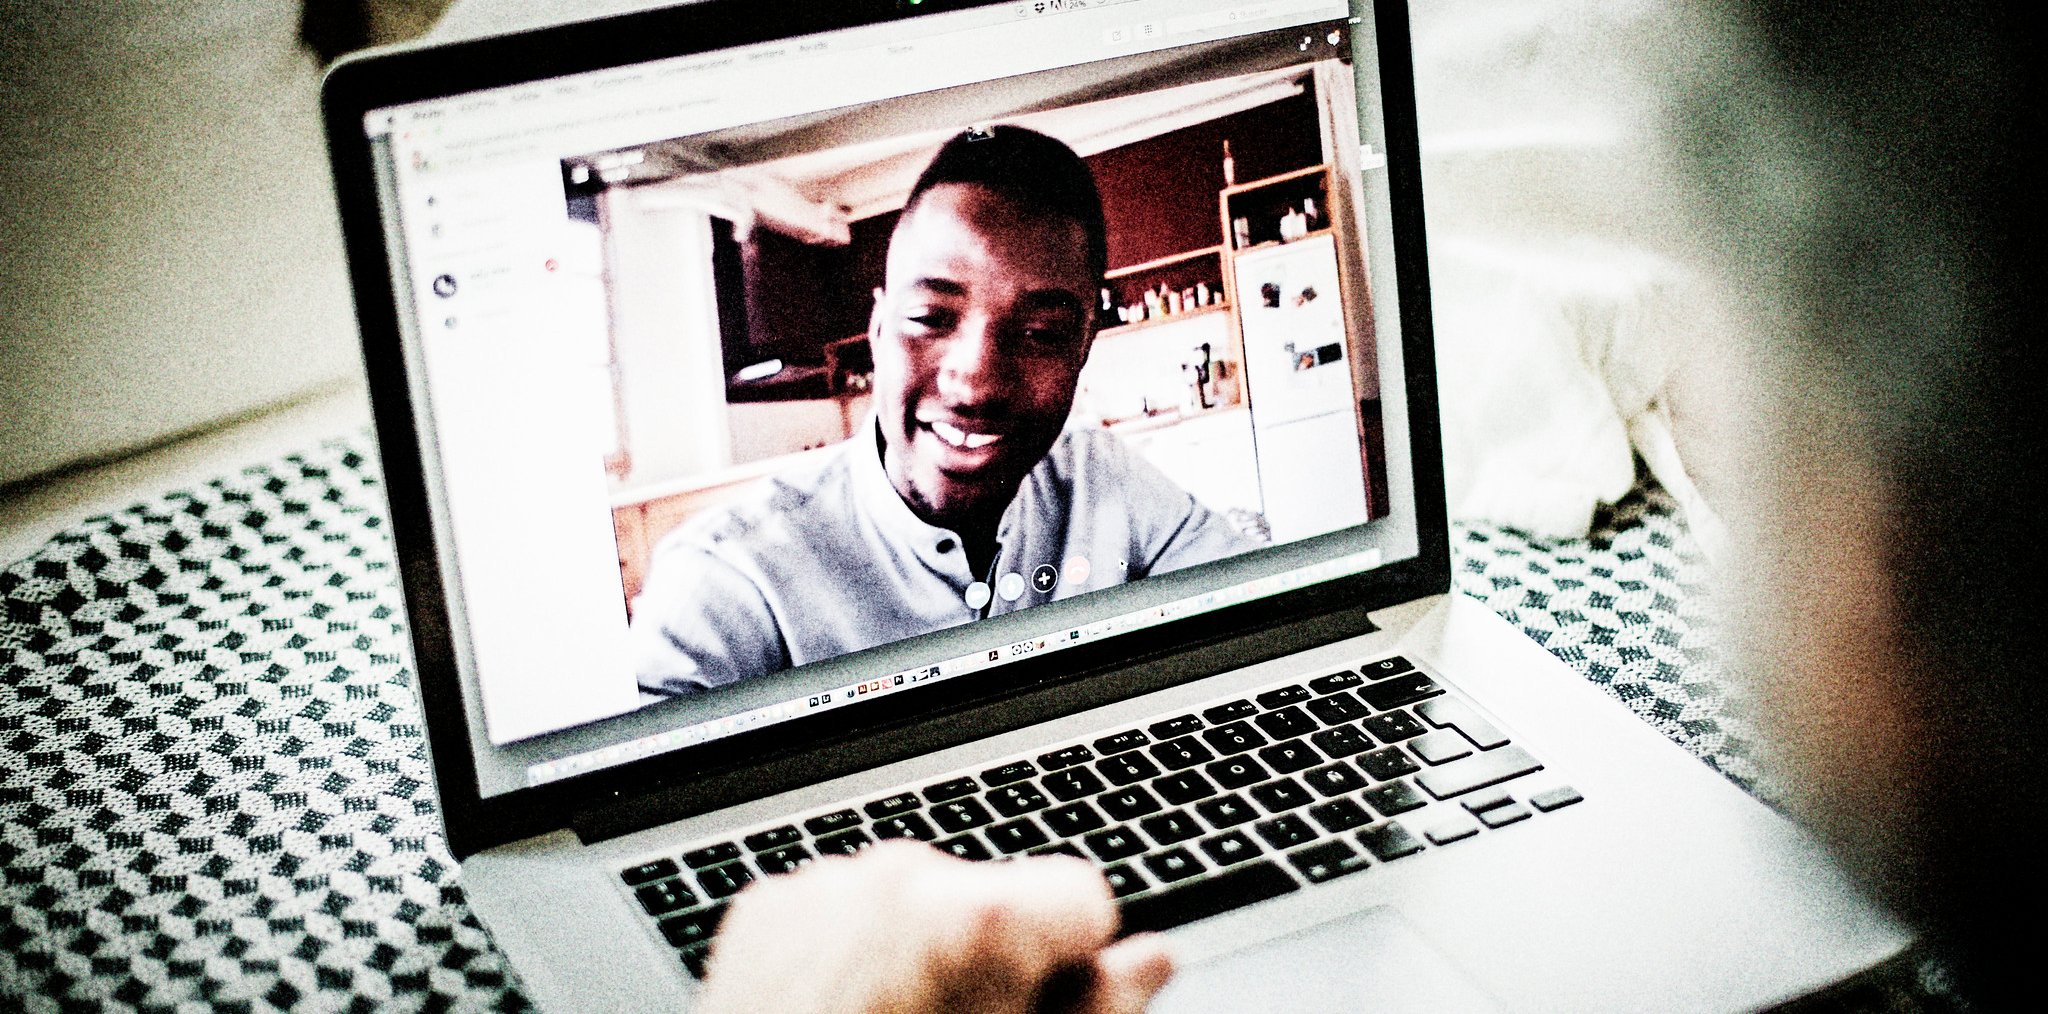 Two person in a video call through the computer